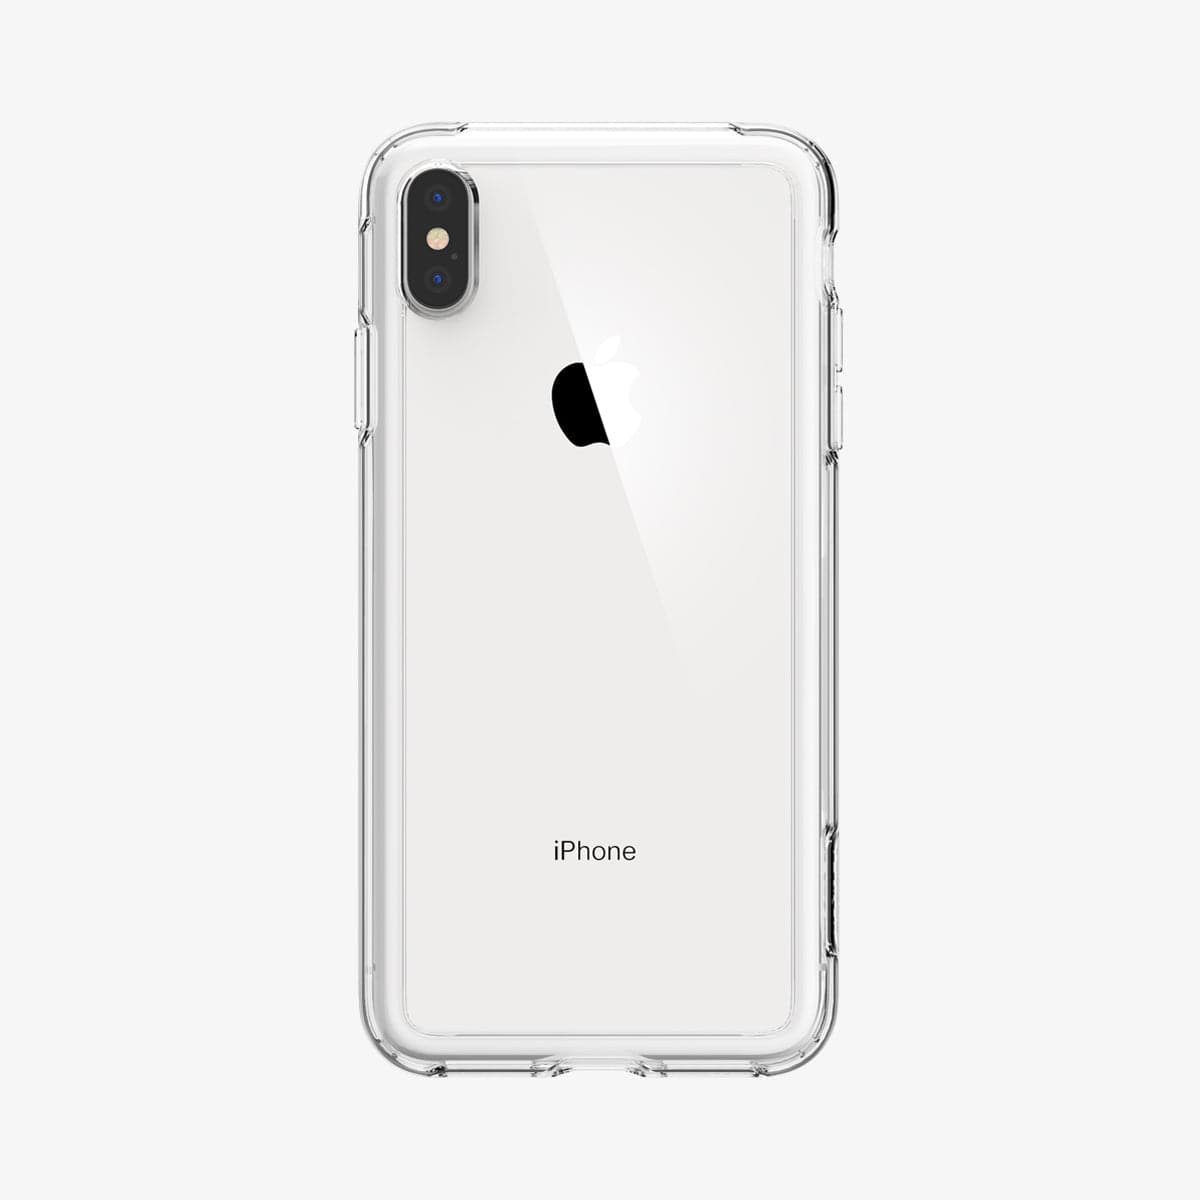 065CS24548 - iPhone XS Max Case Slim Armor Crystal in crystal clear showing the back